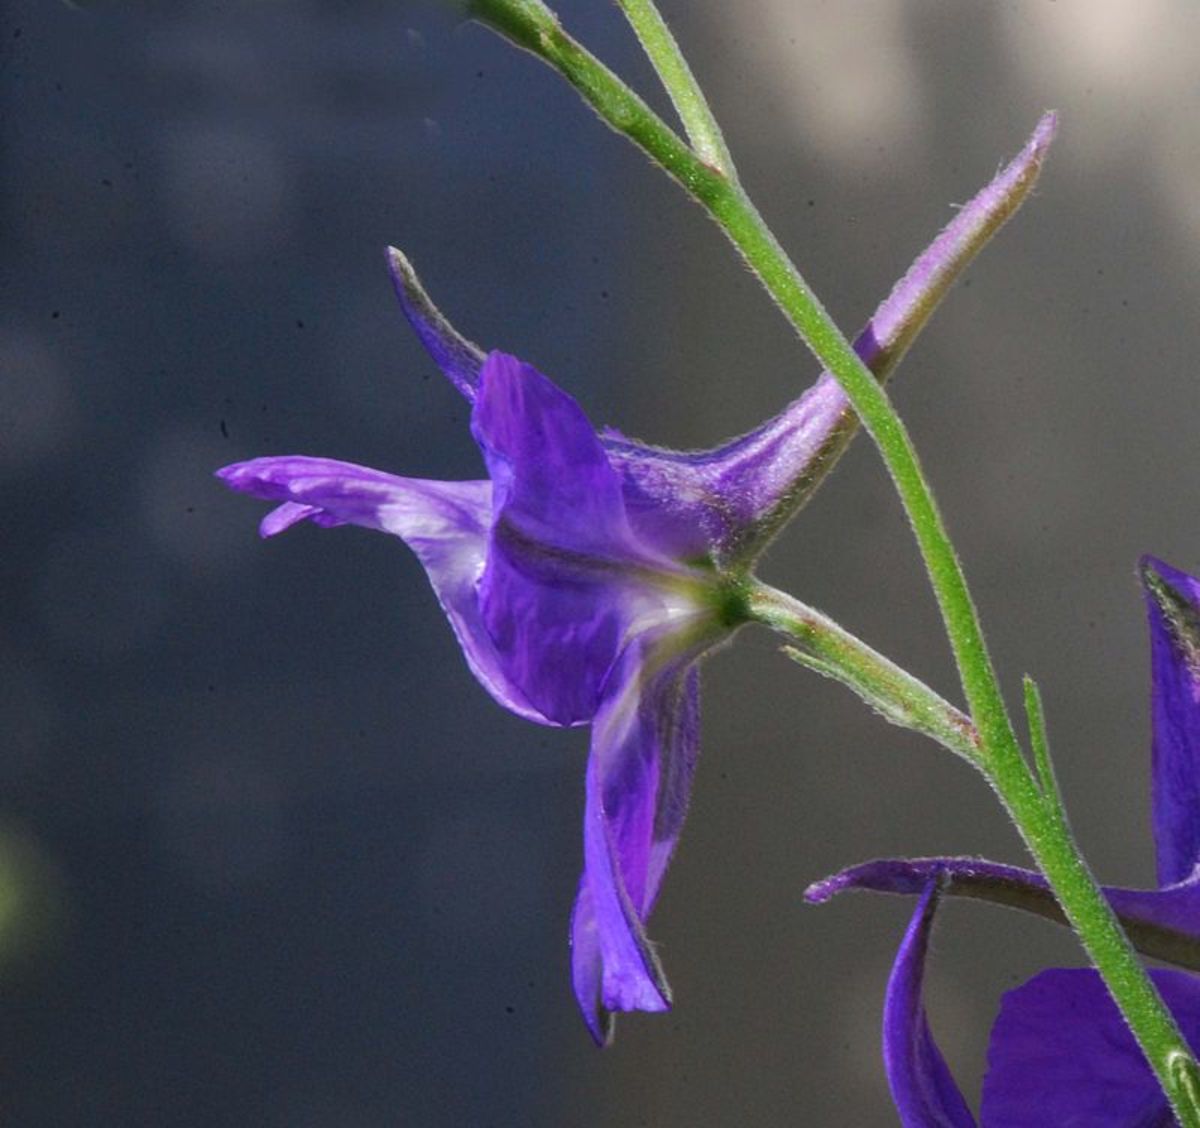 Larkspur flowers have a "spur" on the back of them